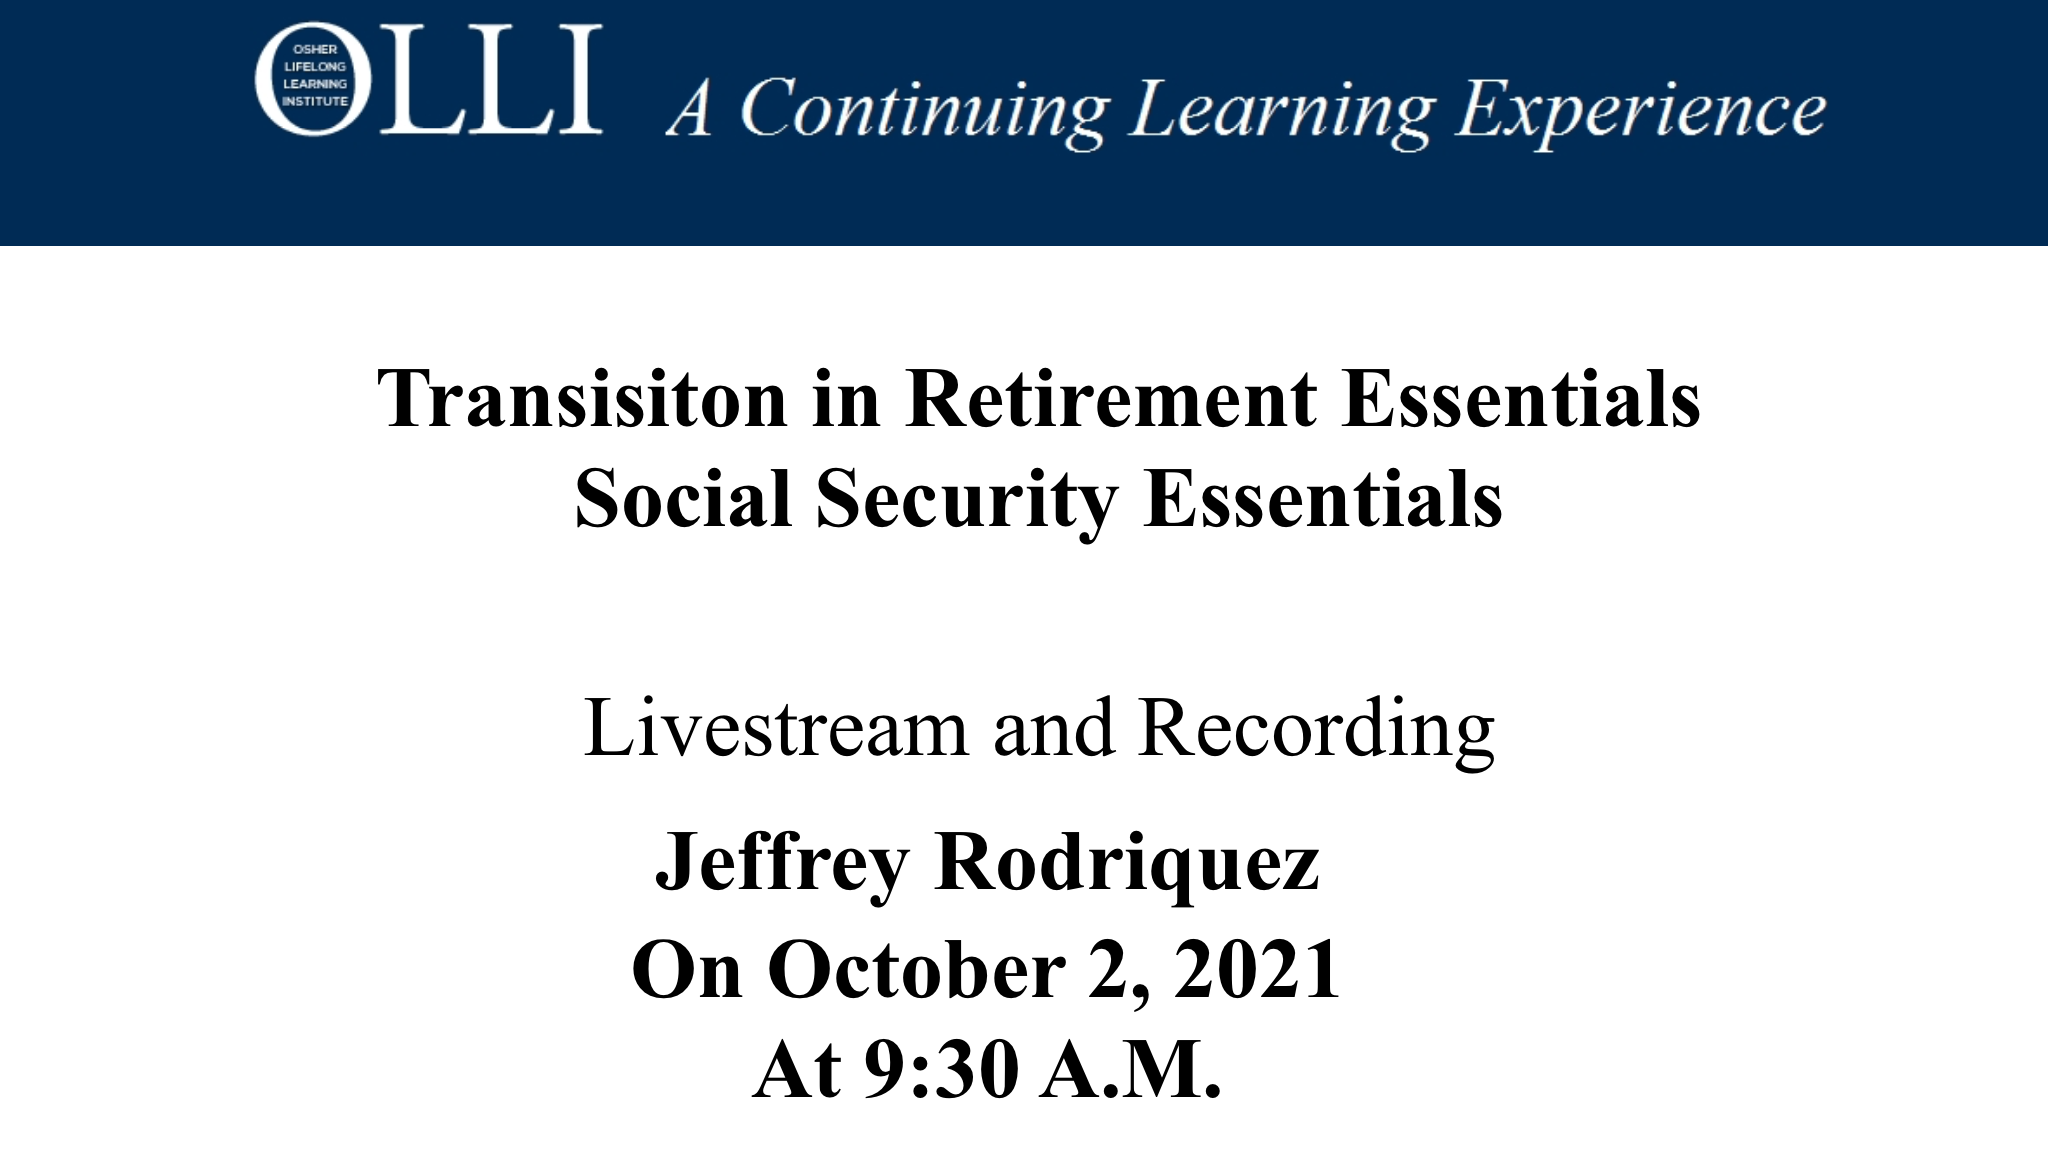 Click here to view the livestream of Social Security Essentials